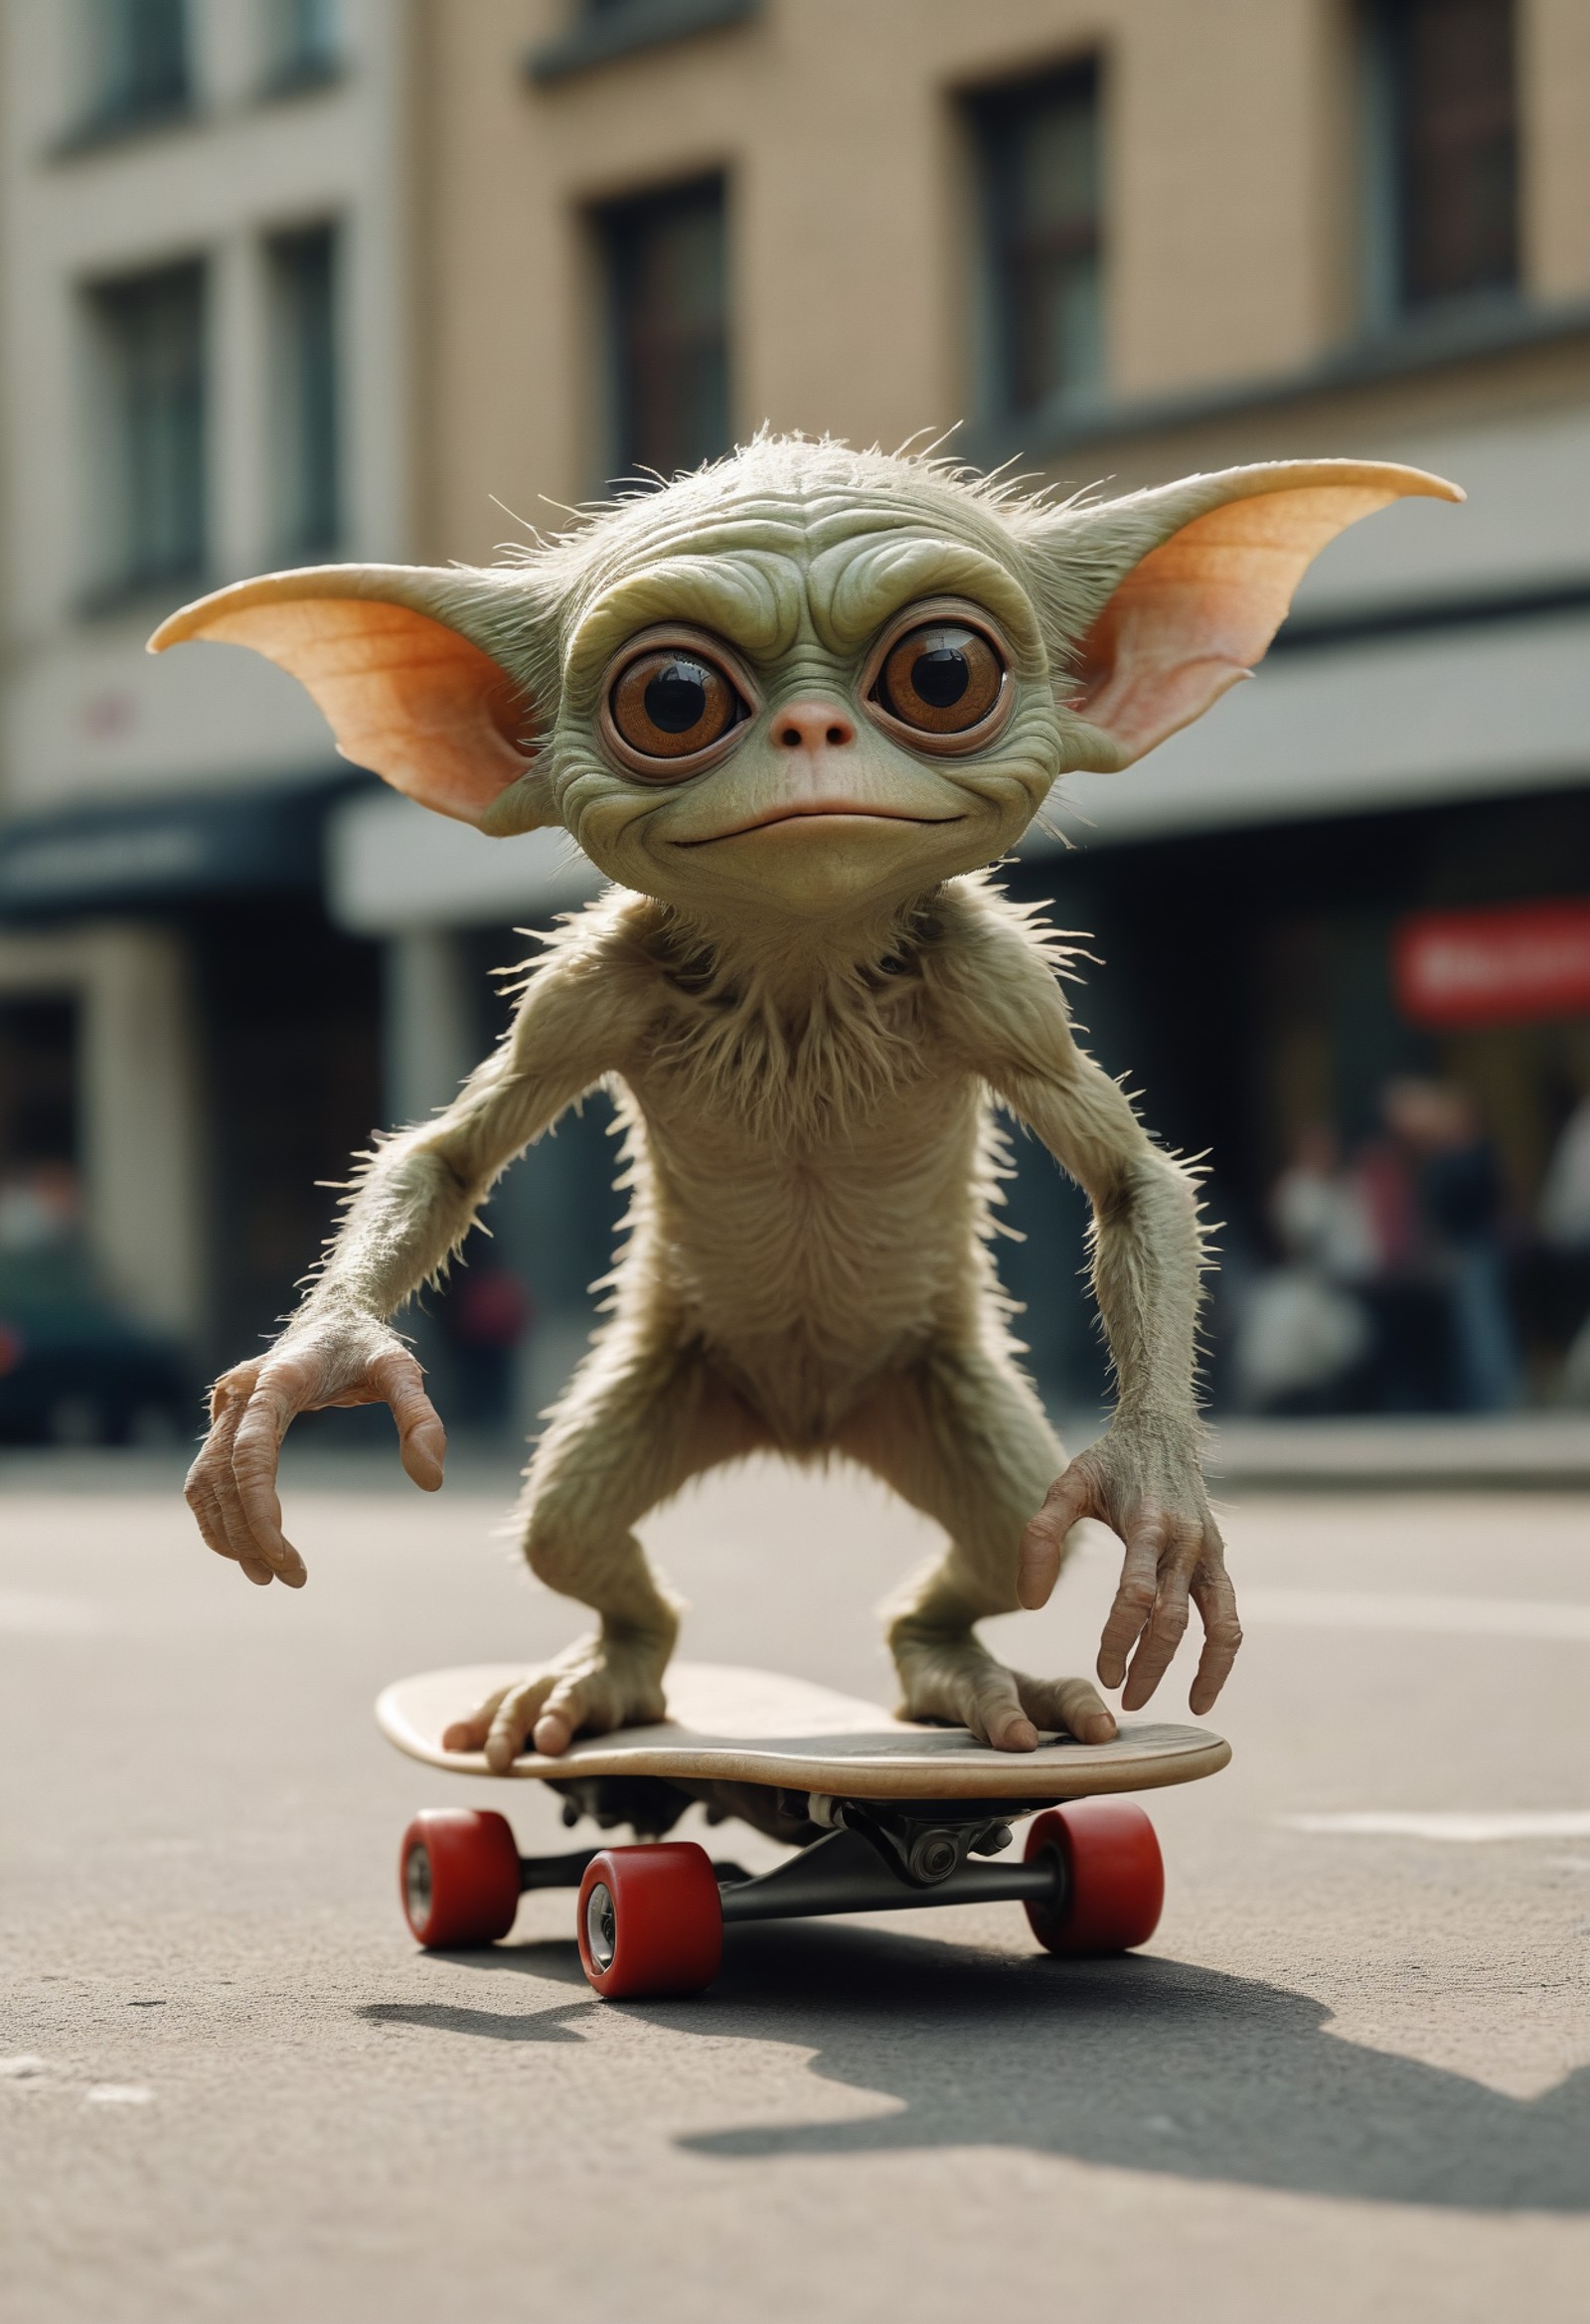 00023-Leica portrait of a gremlin skateboarding, coded patterns, sparse and simple, uhd image, urbancore, sovietwave, period snapshot_.png